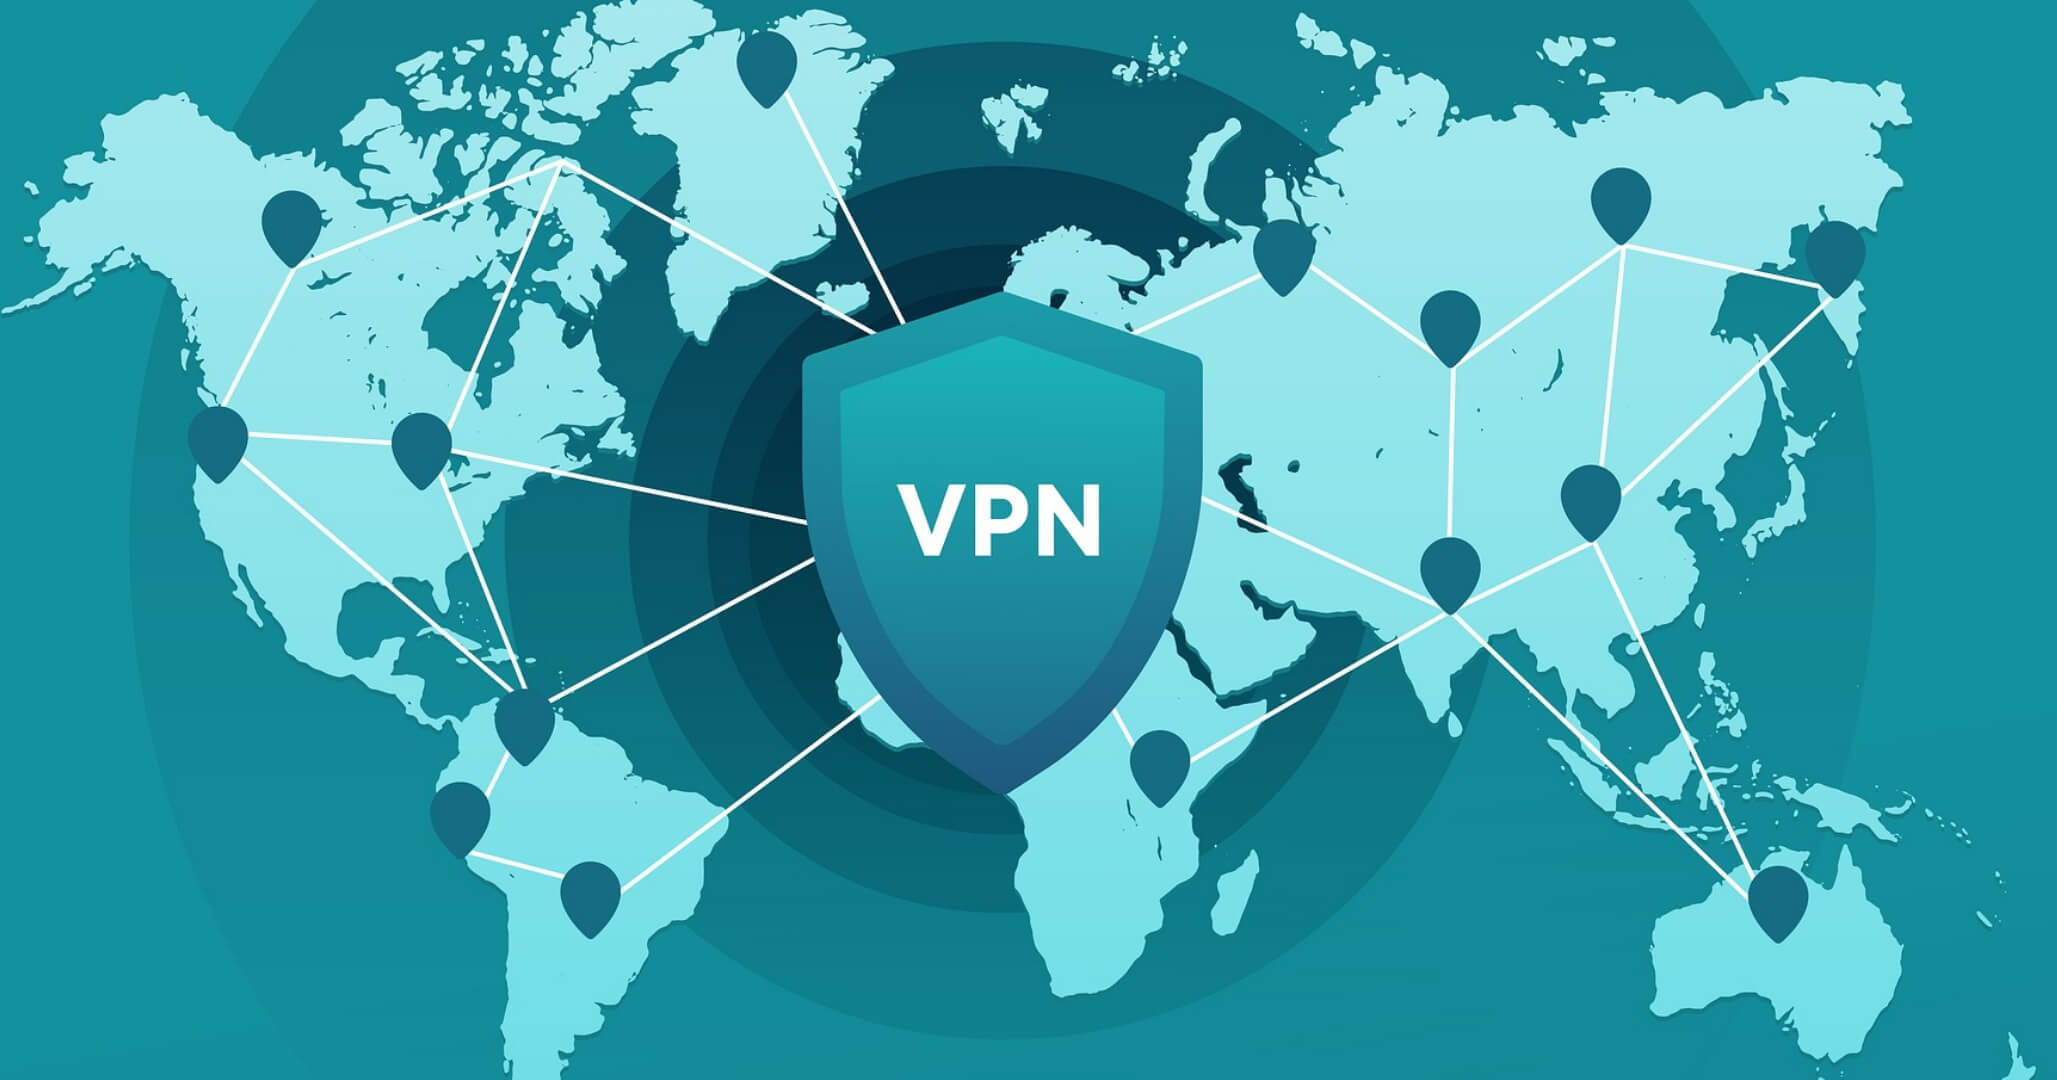 Will ISP Know I’m Using A VPN?